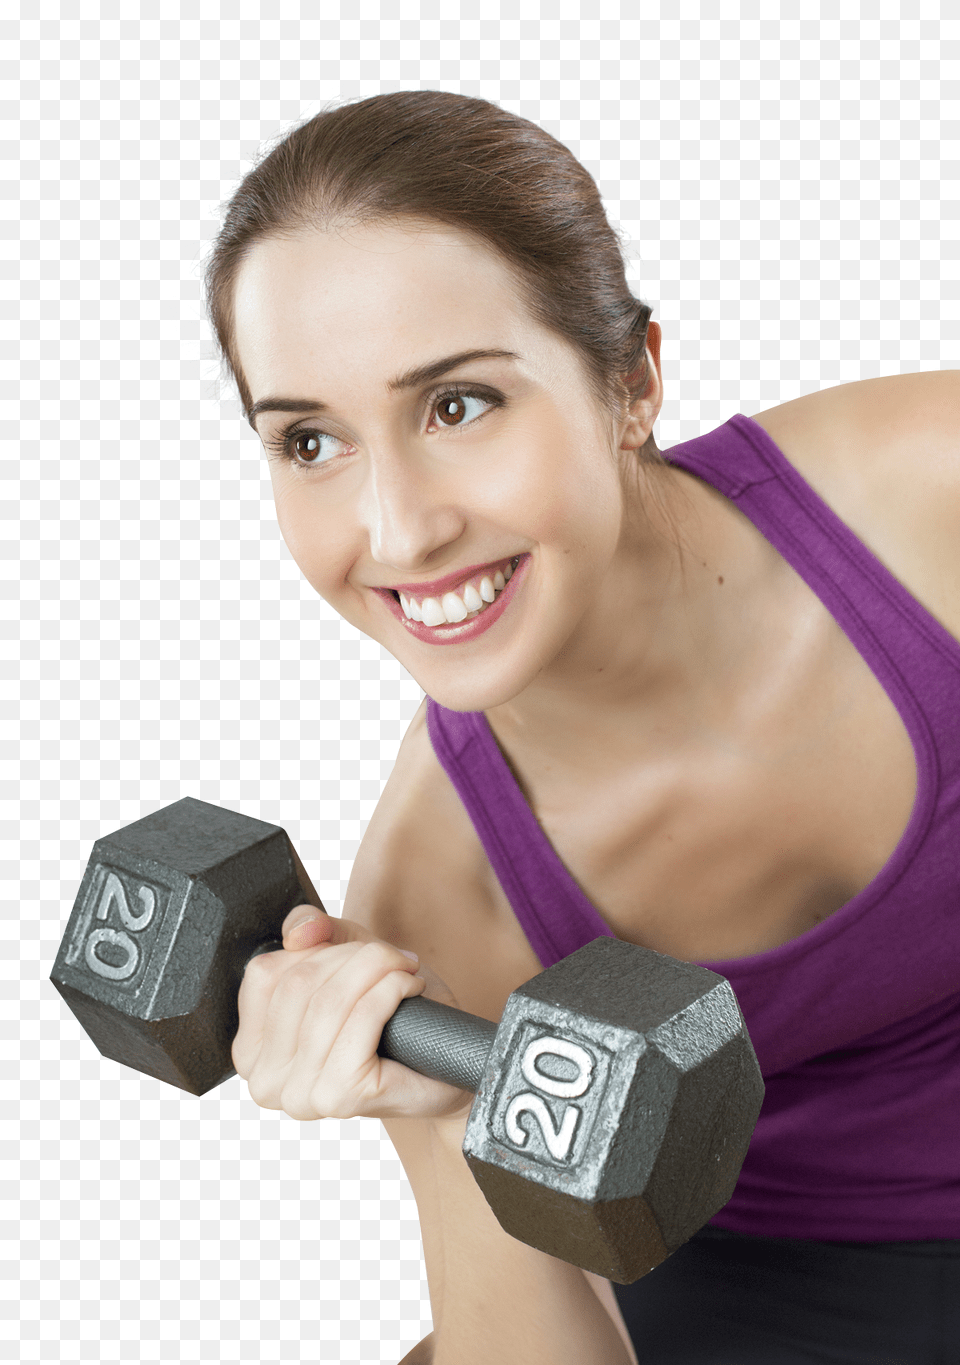 Young Fit Woman Exercises With Dumbbell Pngpix Com Adult, Female, Person, Sport Png Image